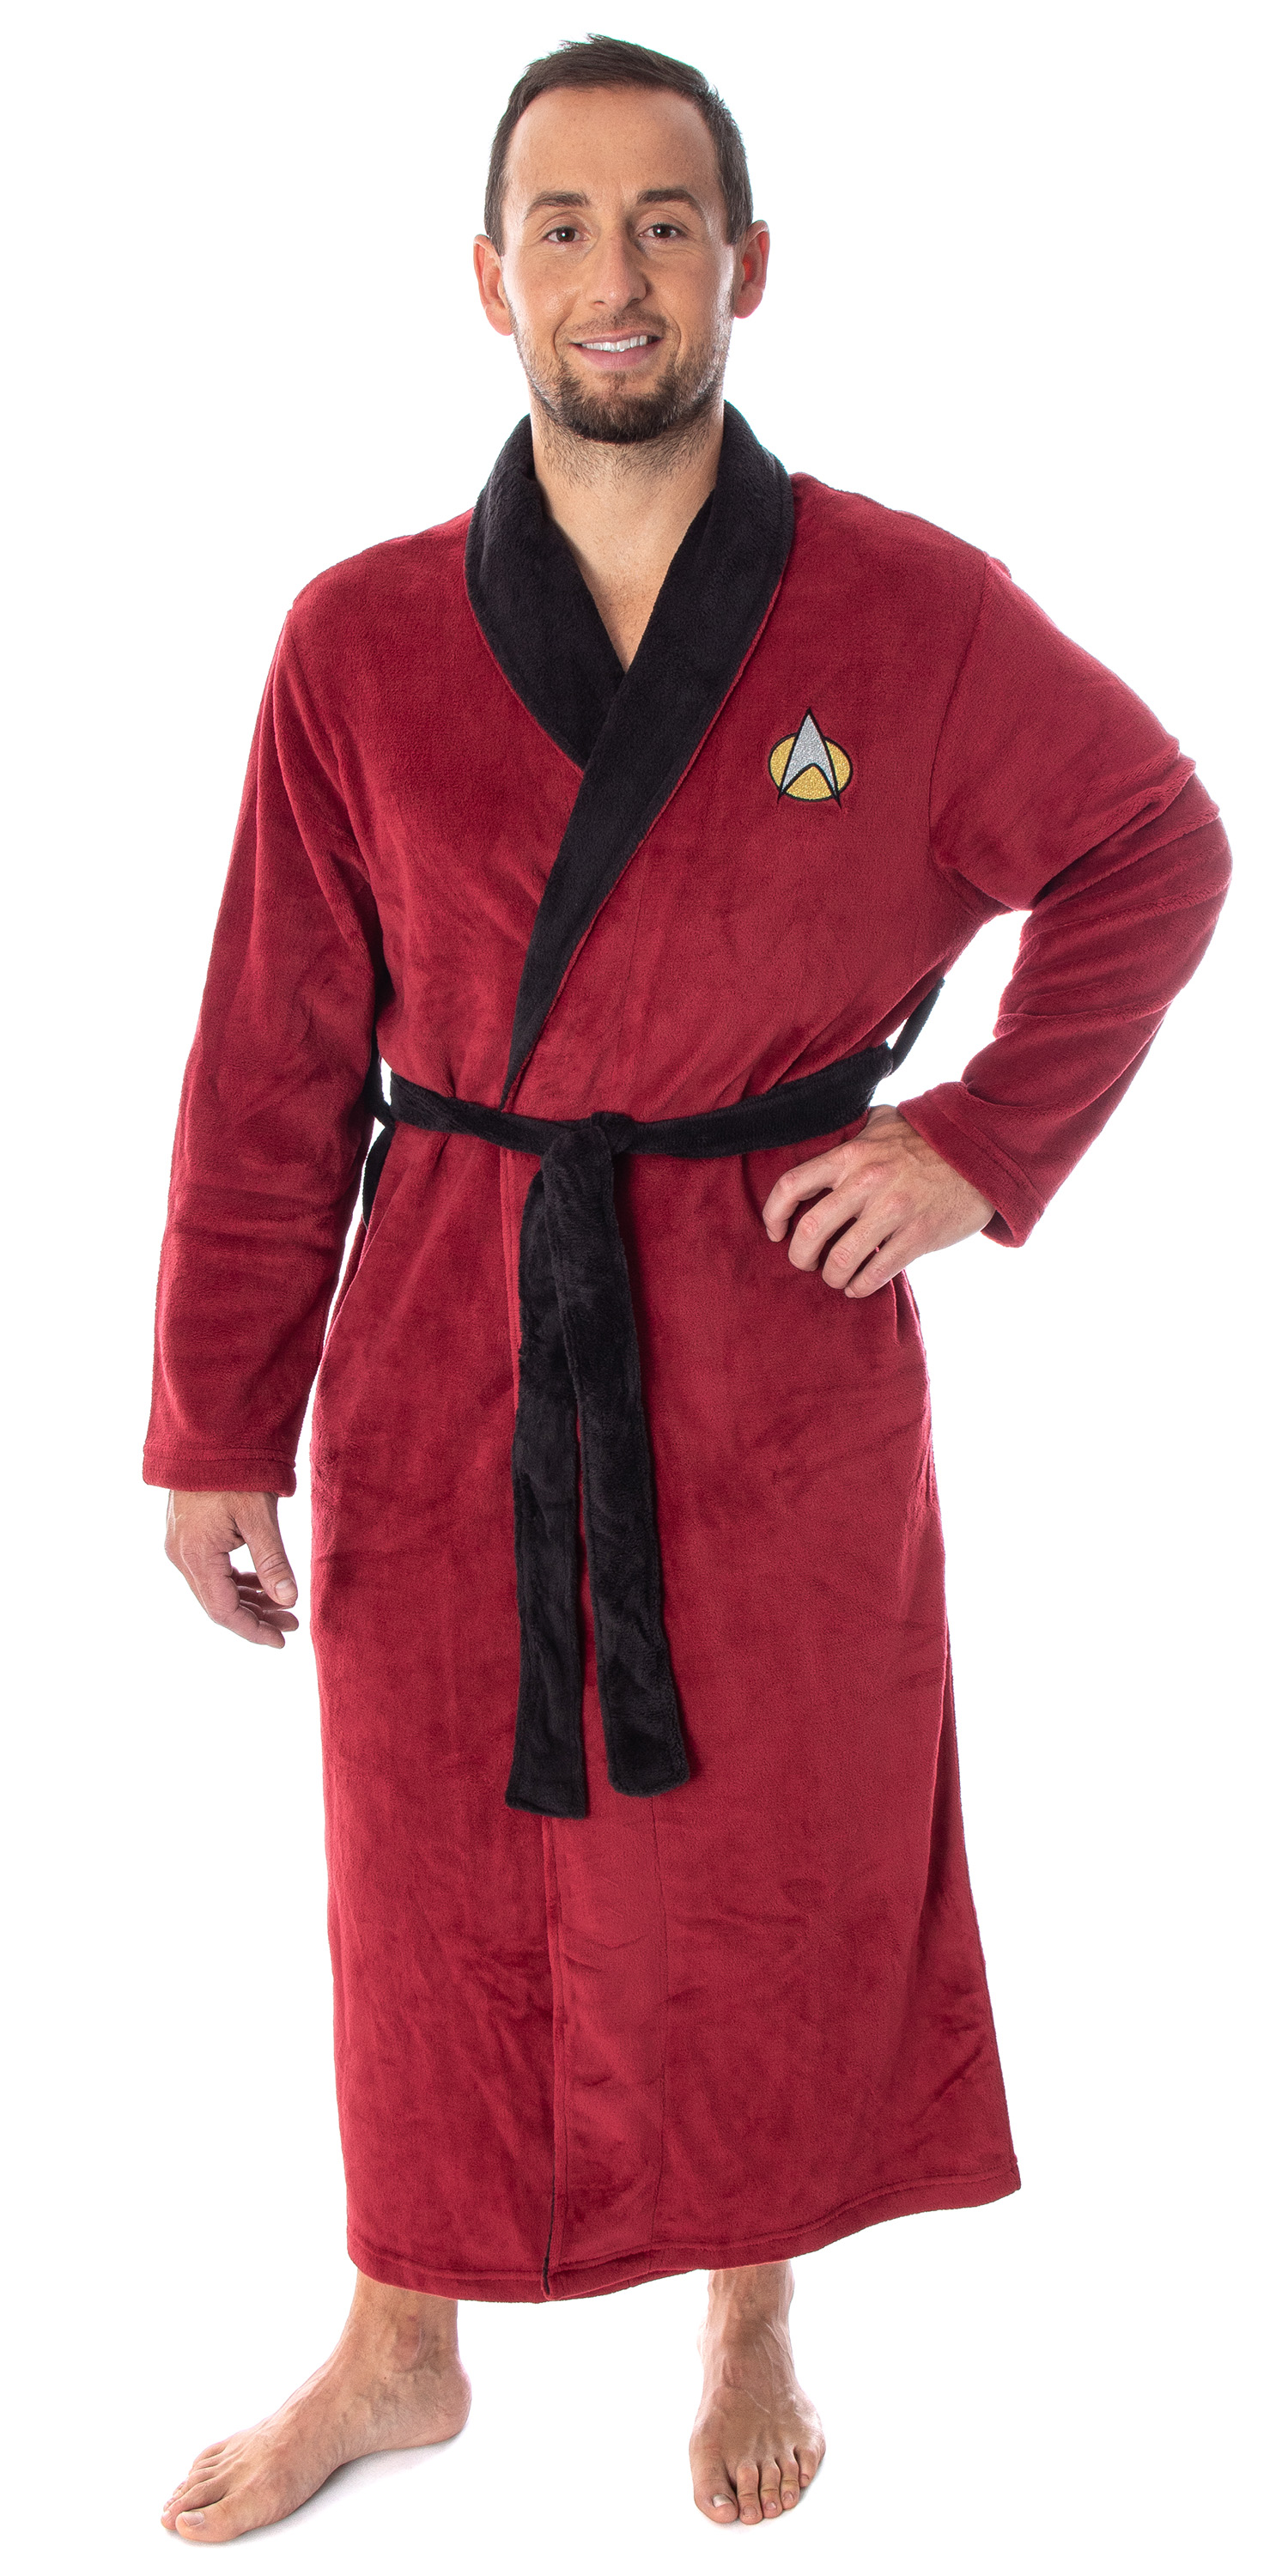 Star Trek: The Next Generation Command Bathrobe for Men And Women Soft Plush Spa Robe for Adults One Size Fits Most Adults Lightweight Fleece Shower Robe With Belted Tie 